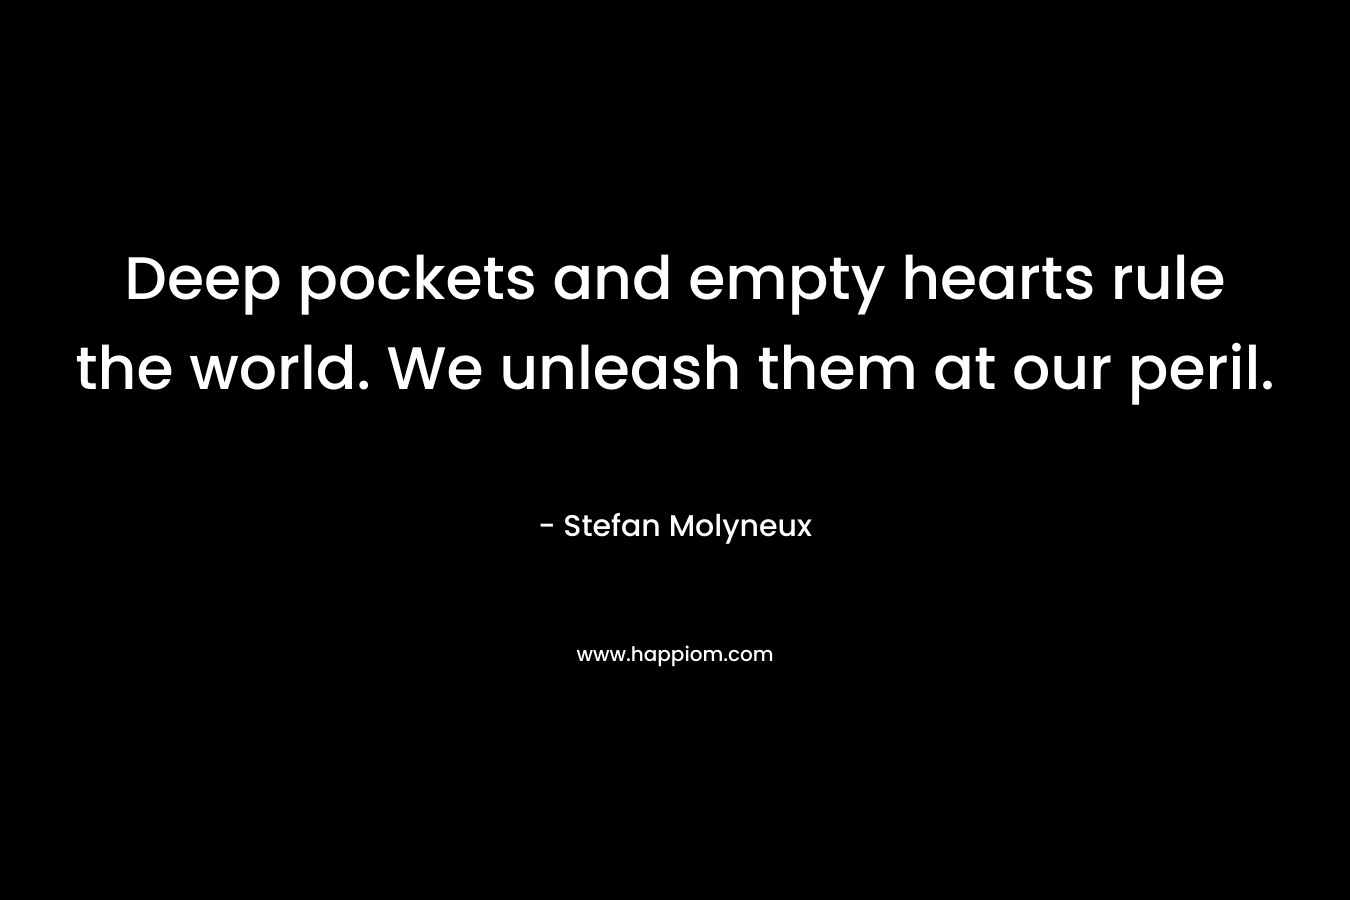 Deep pockets and empty hearts rule the world. We unleash them at our peril.